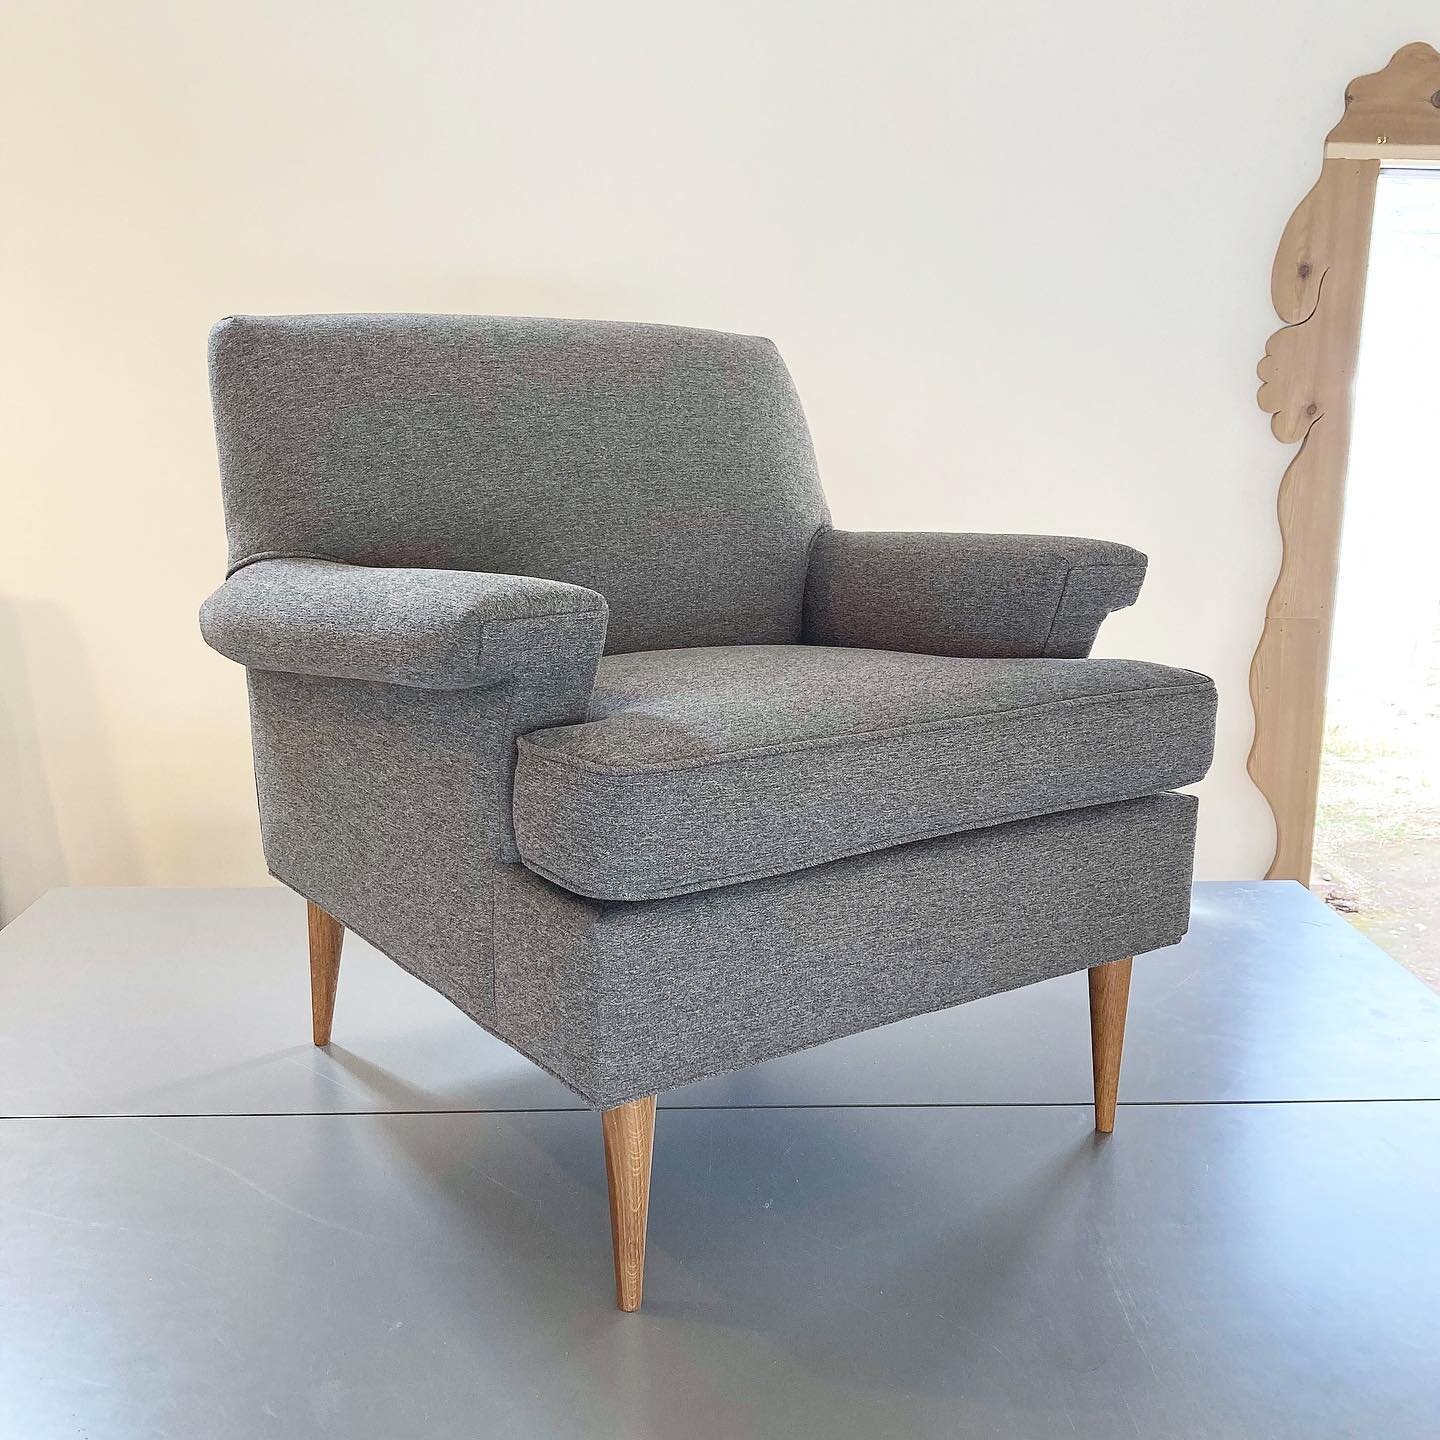 Taking a moment to appreciate a sweet set of mid-century armchairs that got a major glowup recently! Redone in a super soft heather grey, we completed the look with brand new vintage-style wood legs. I loved the boxy lines on these lady greys and had